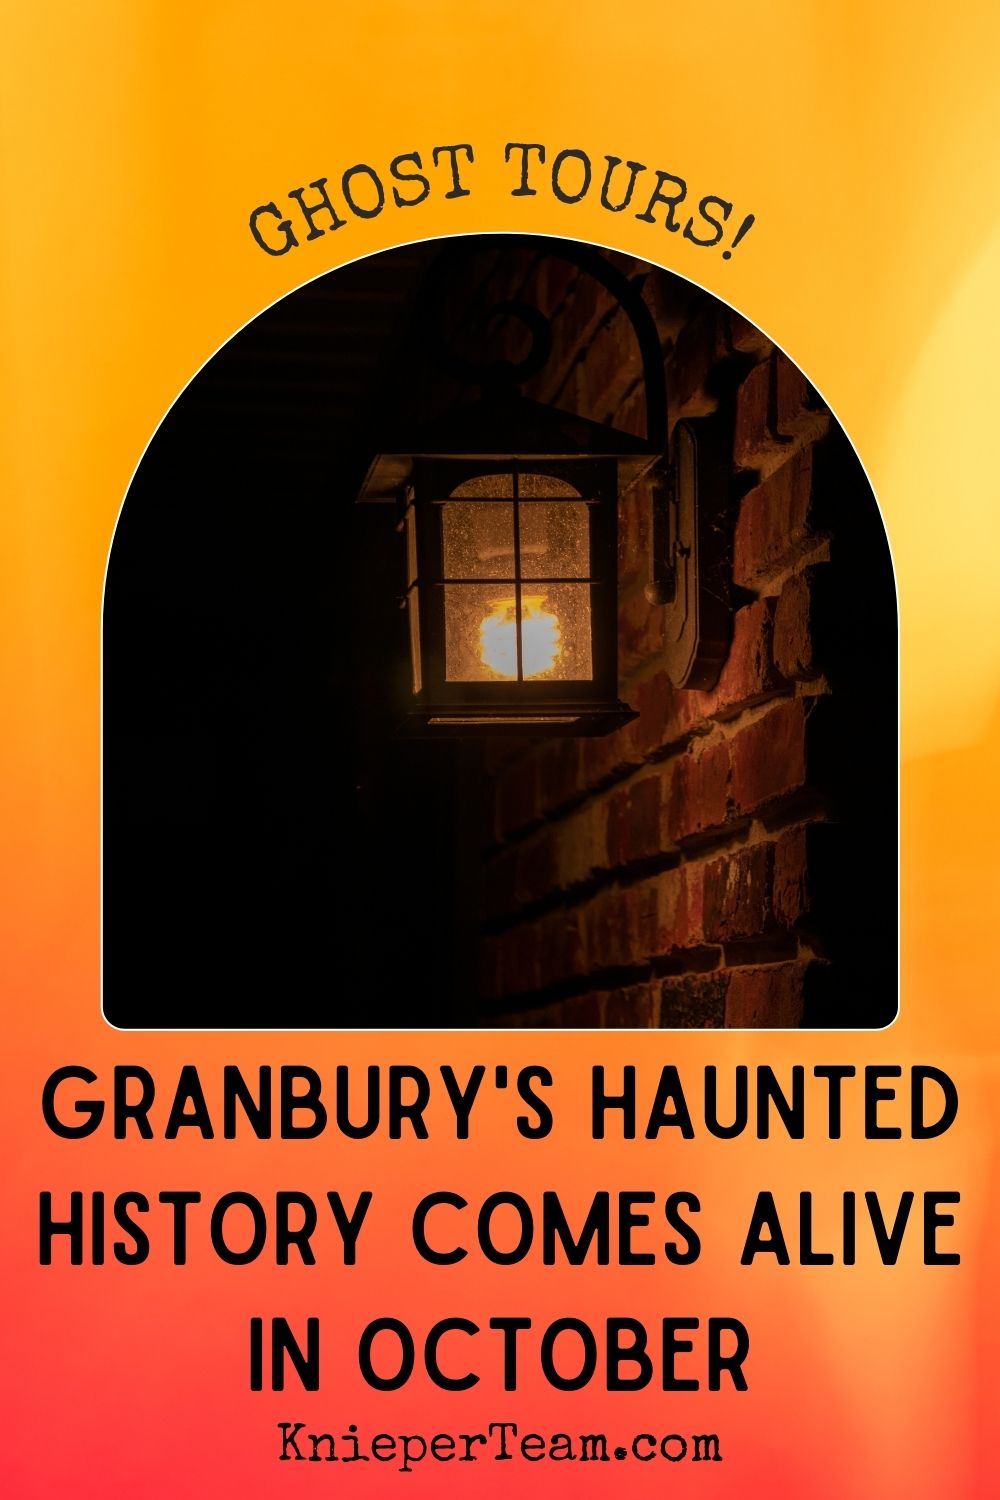 Granbury's Haunted History Comes Alive in October